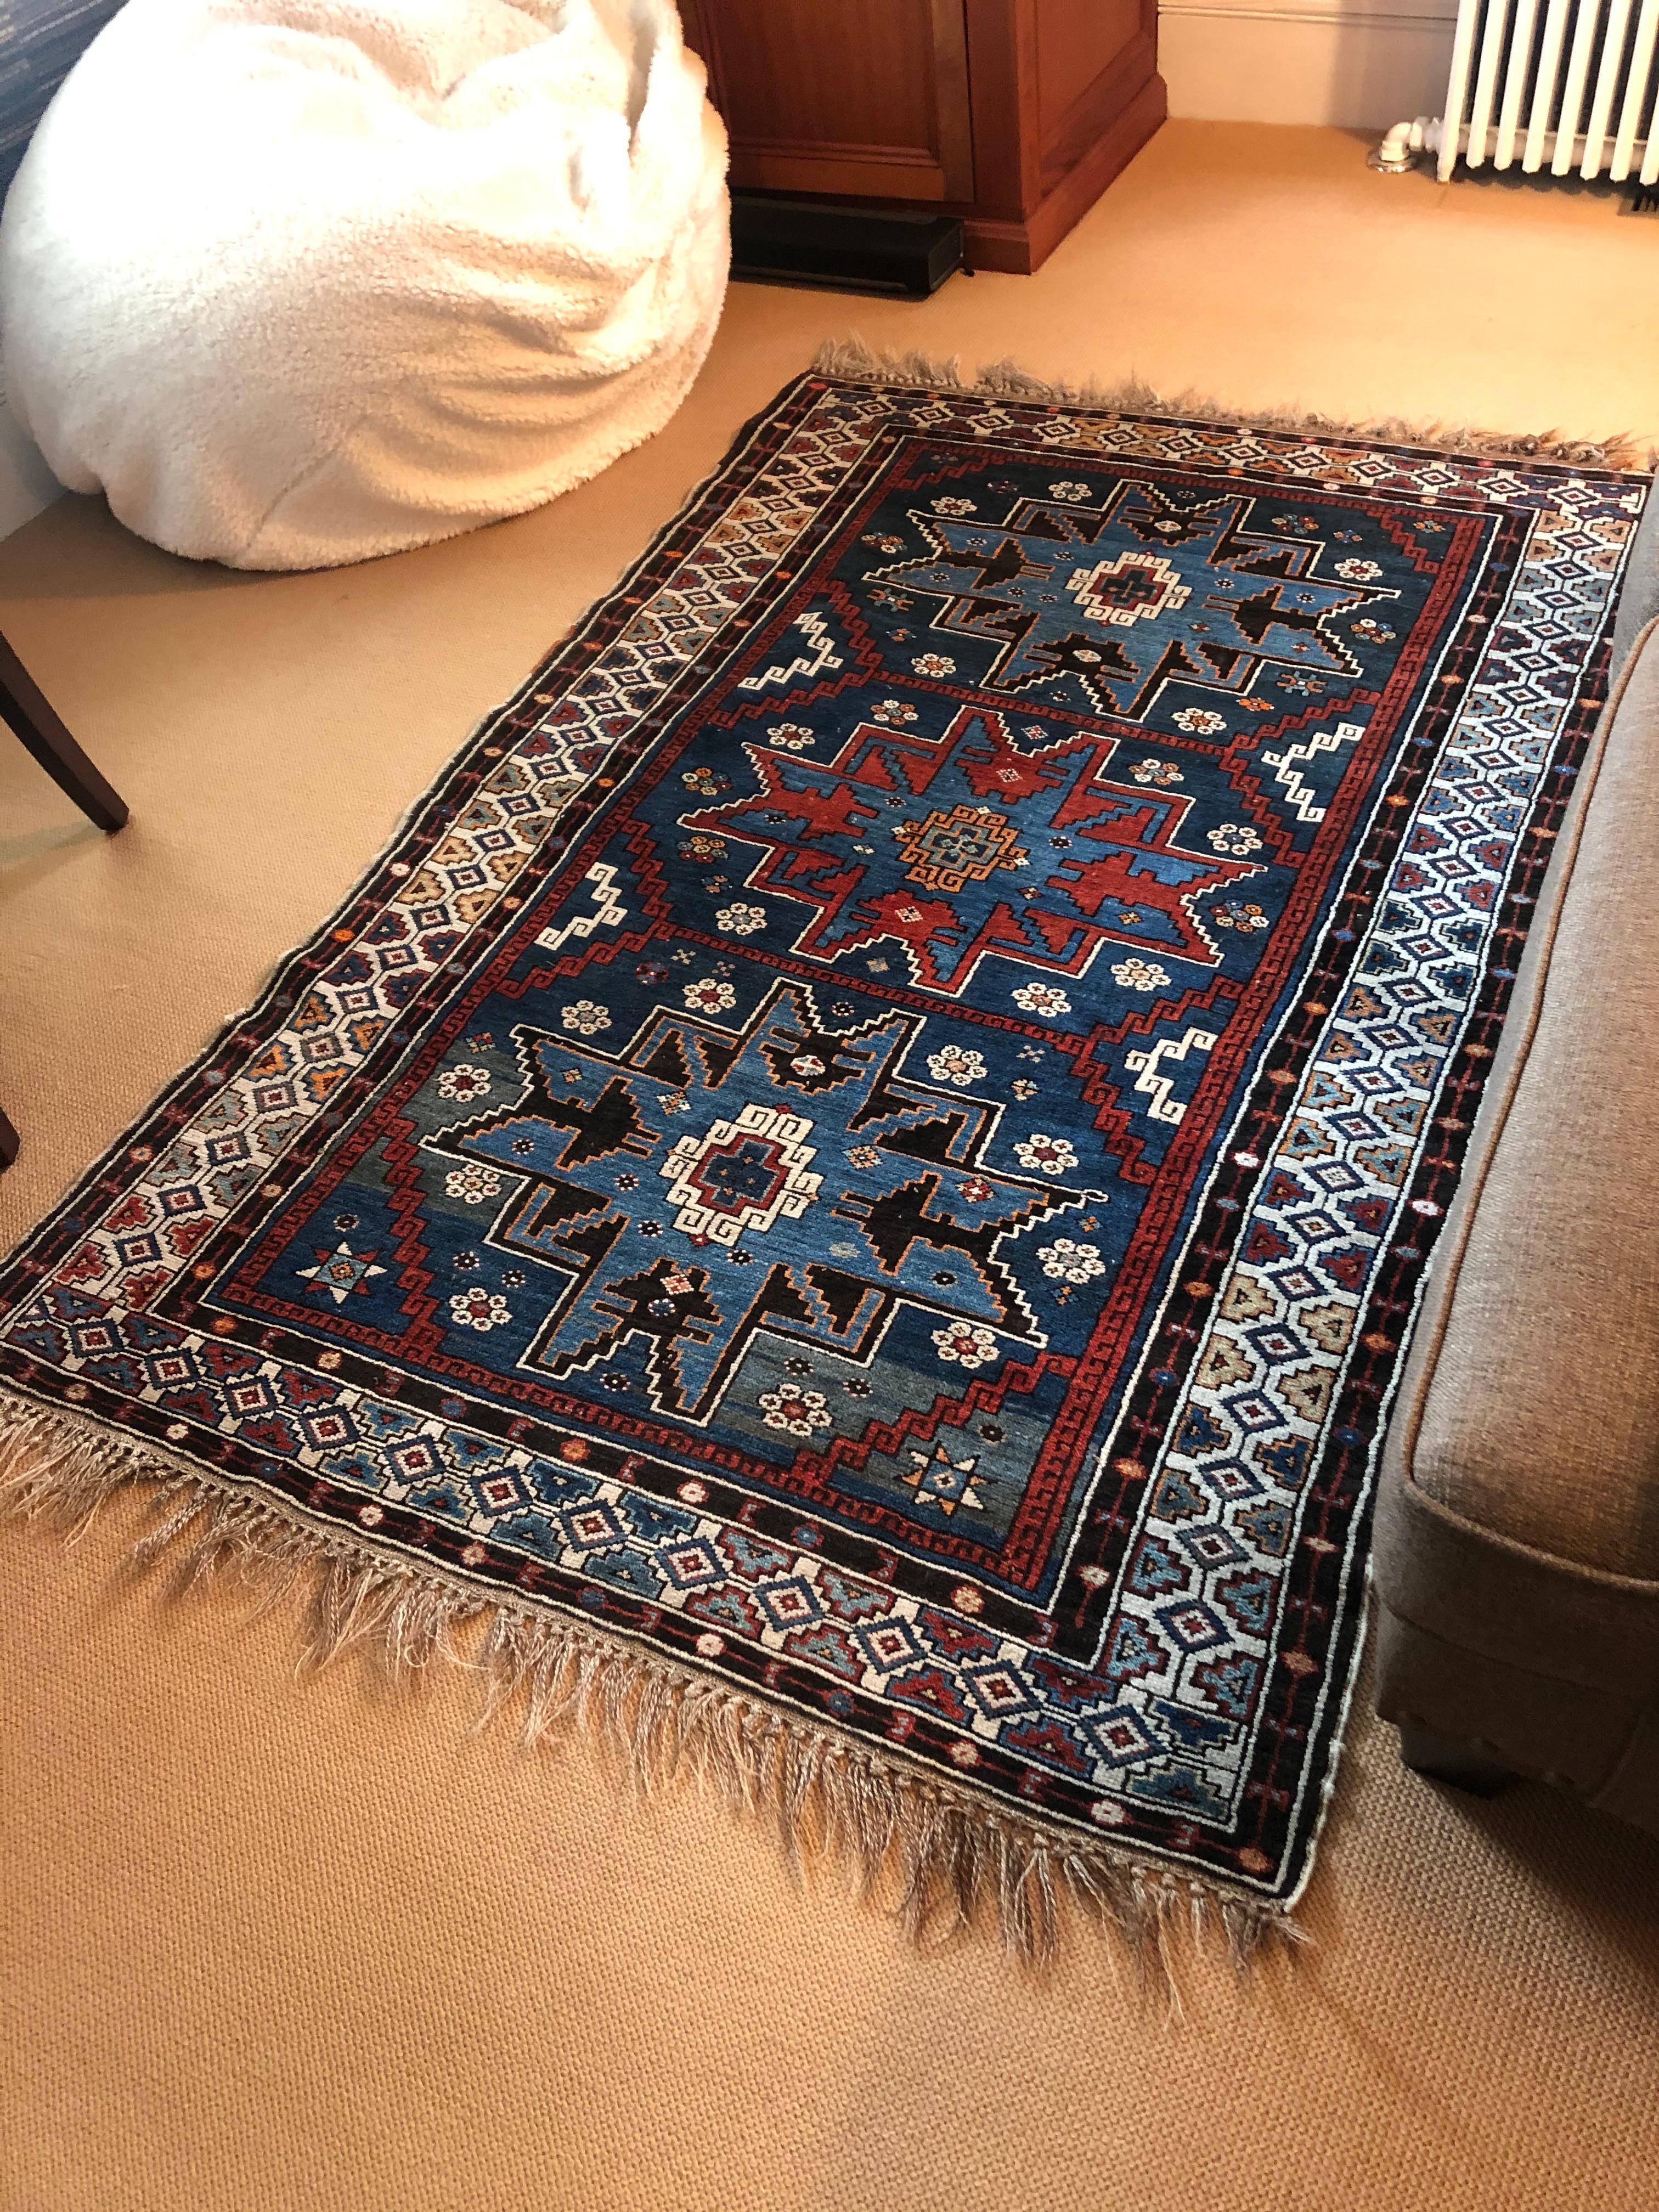 Richly Patterned Antique Area Rug in Blues and Cranberry 1